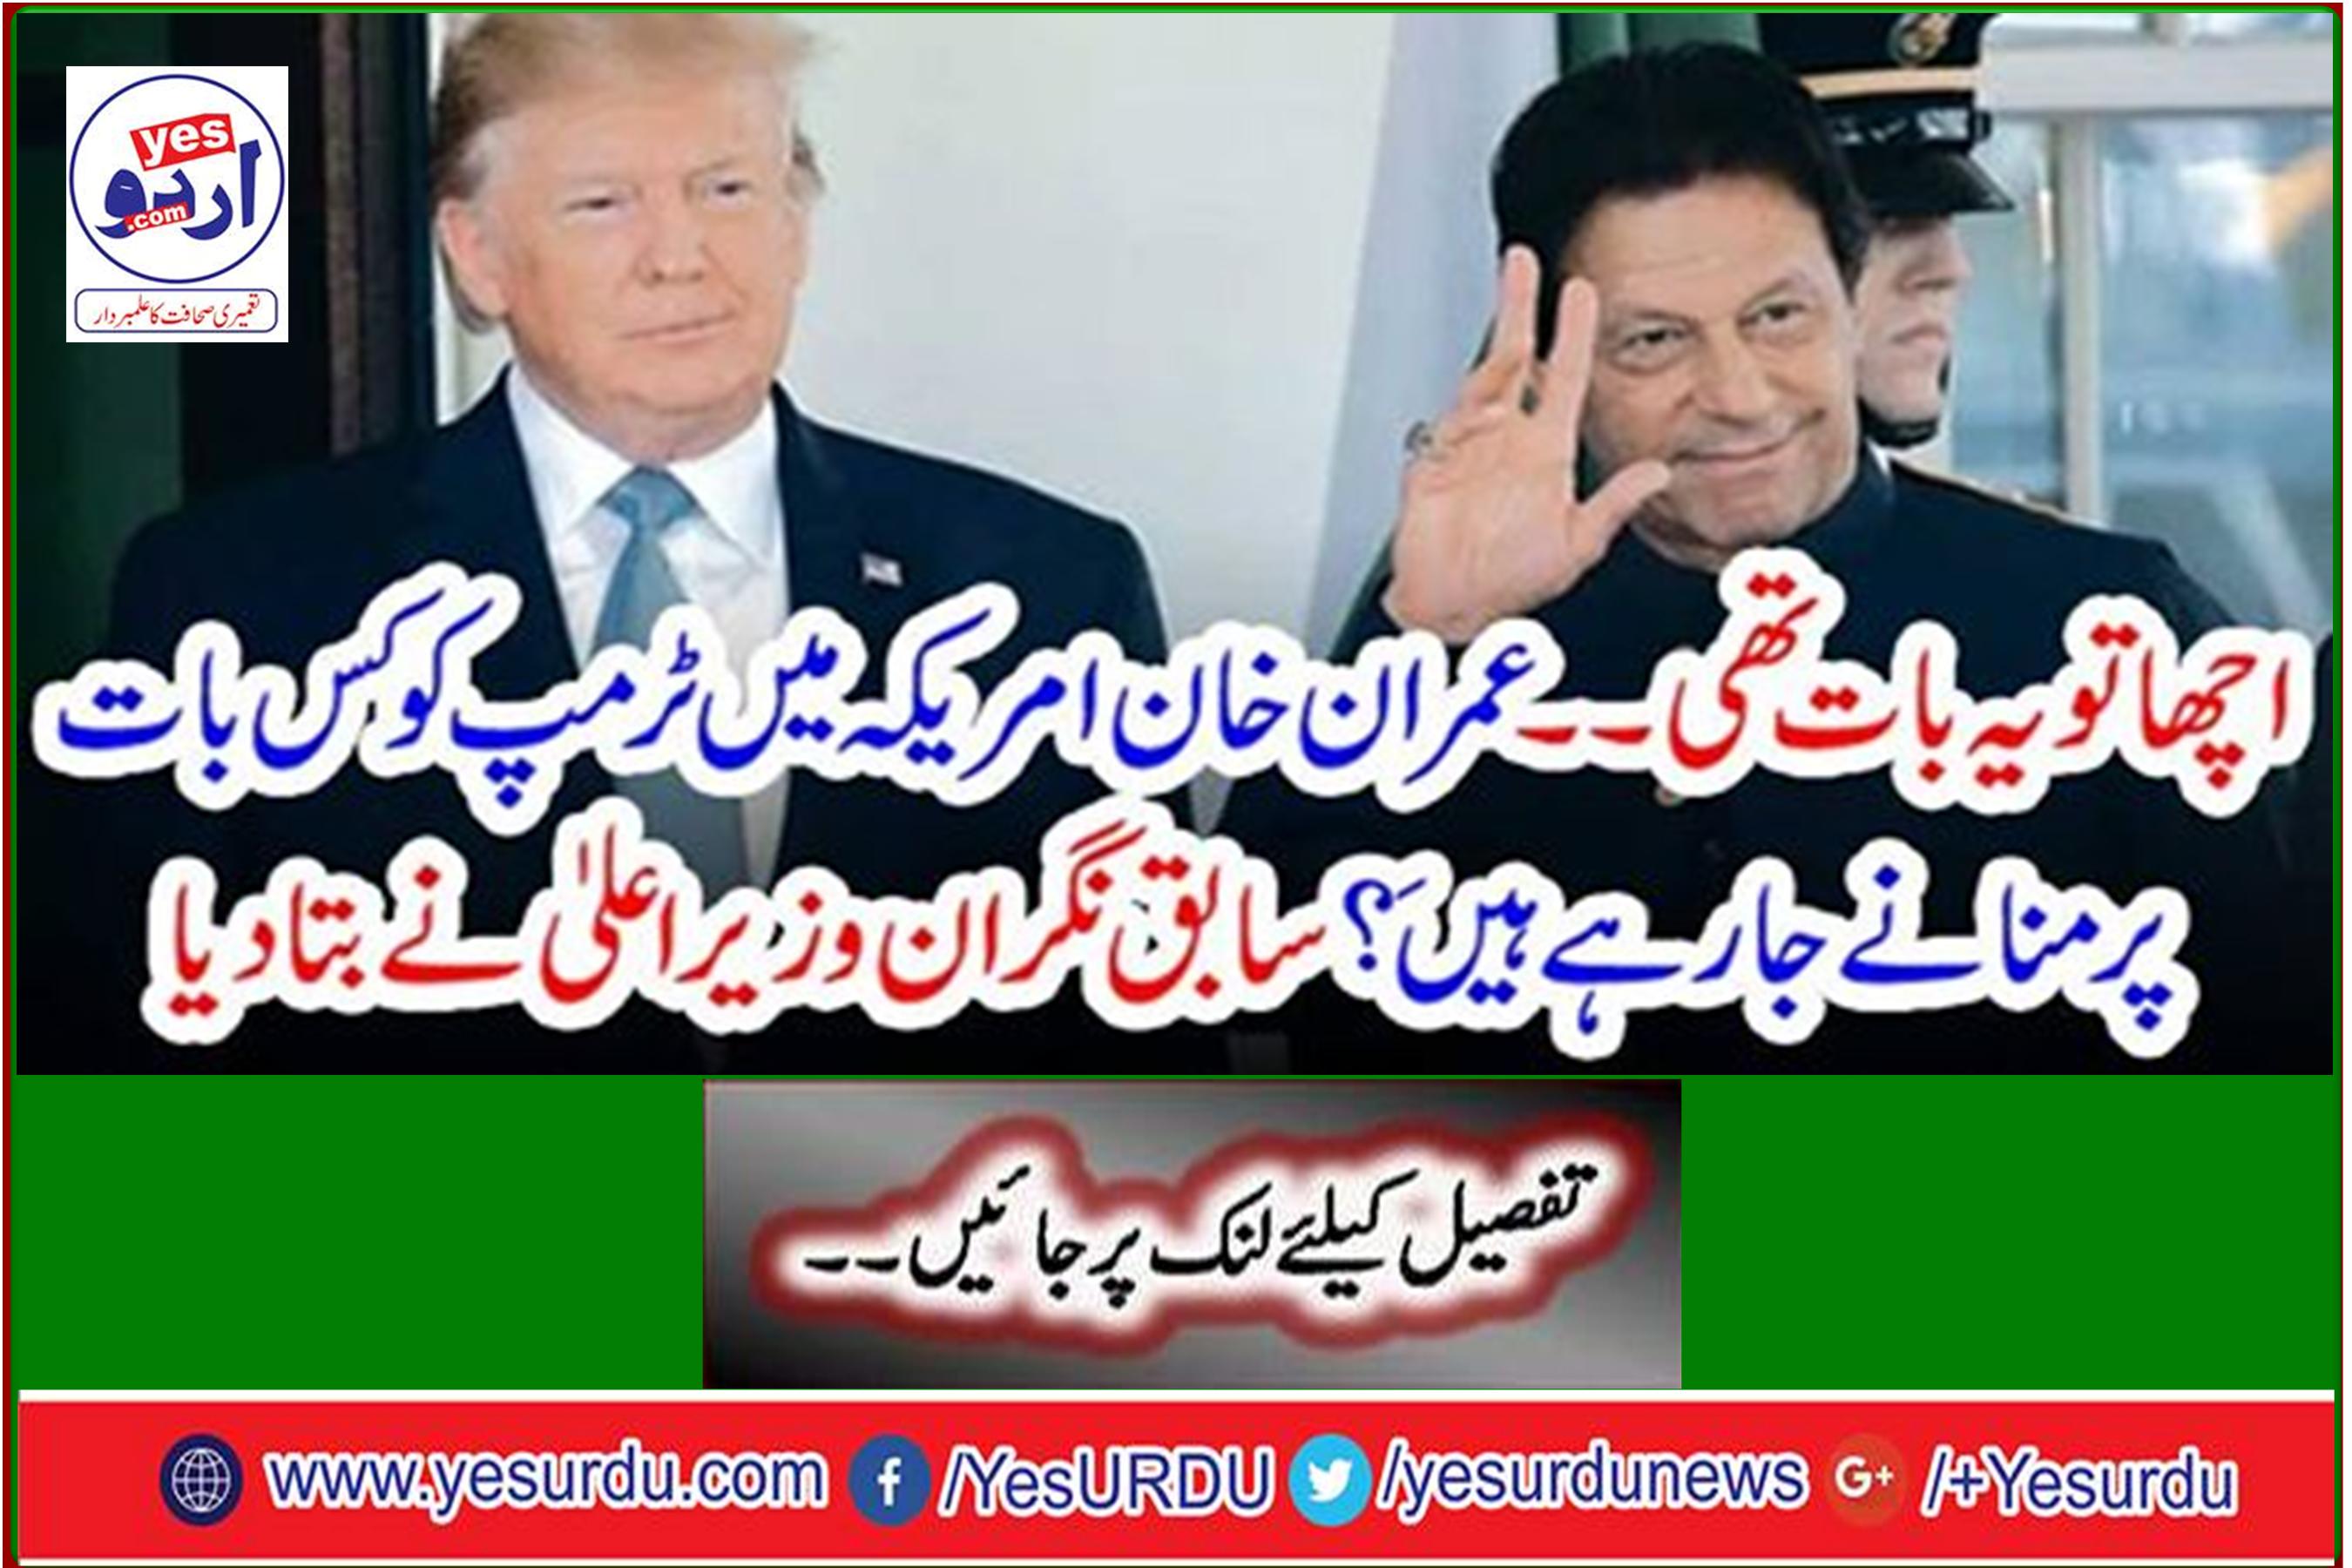 What is Imran Khan going to celebrate with Trump in the United States?